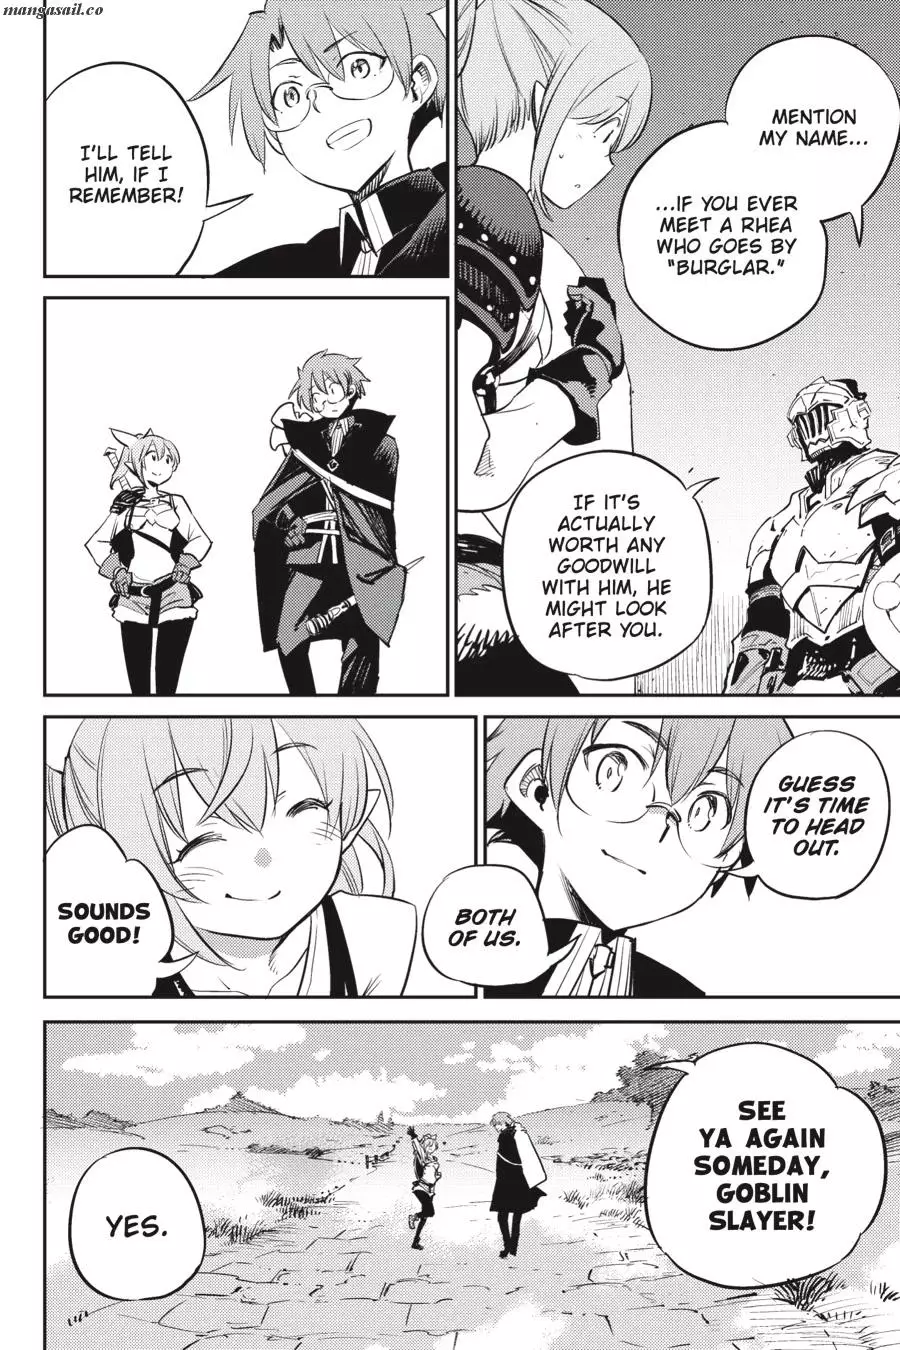 Goblin Slayer - 75 page 16-959a9dee